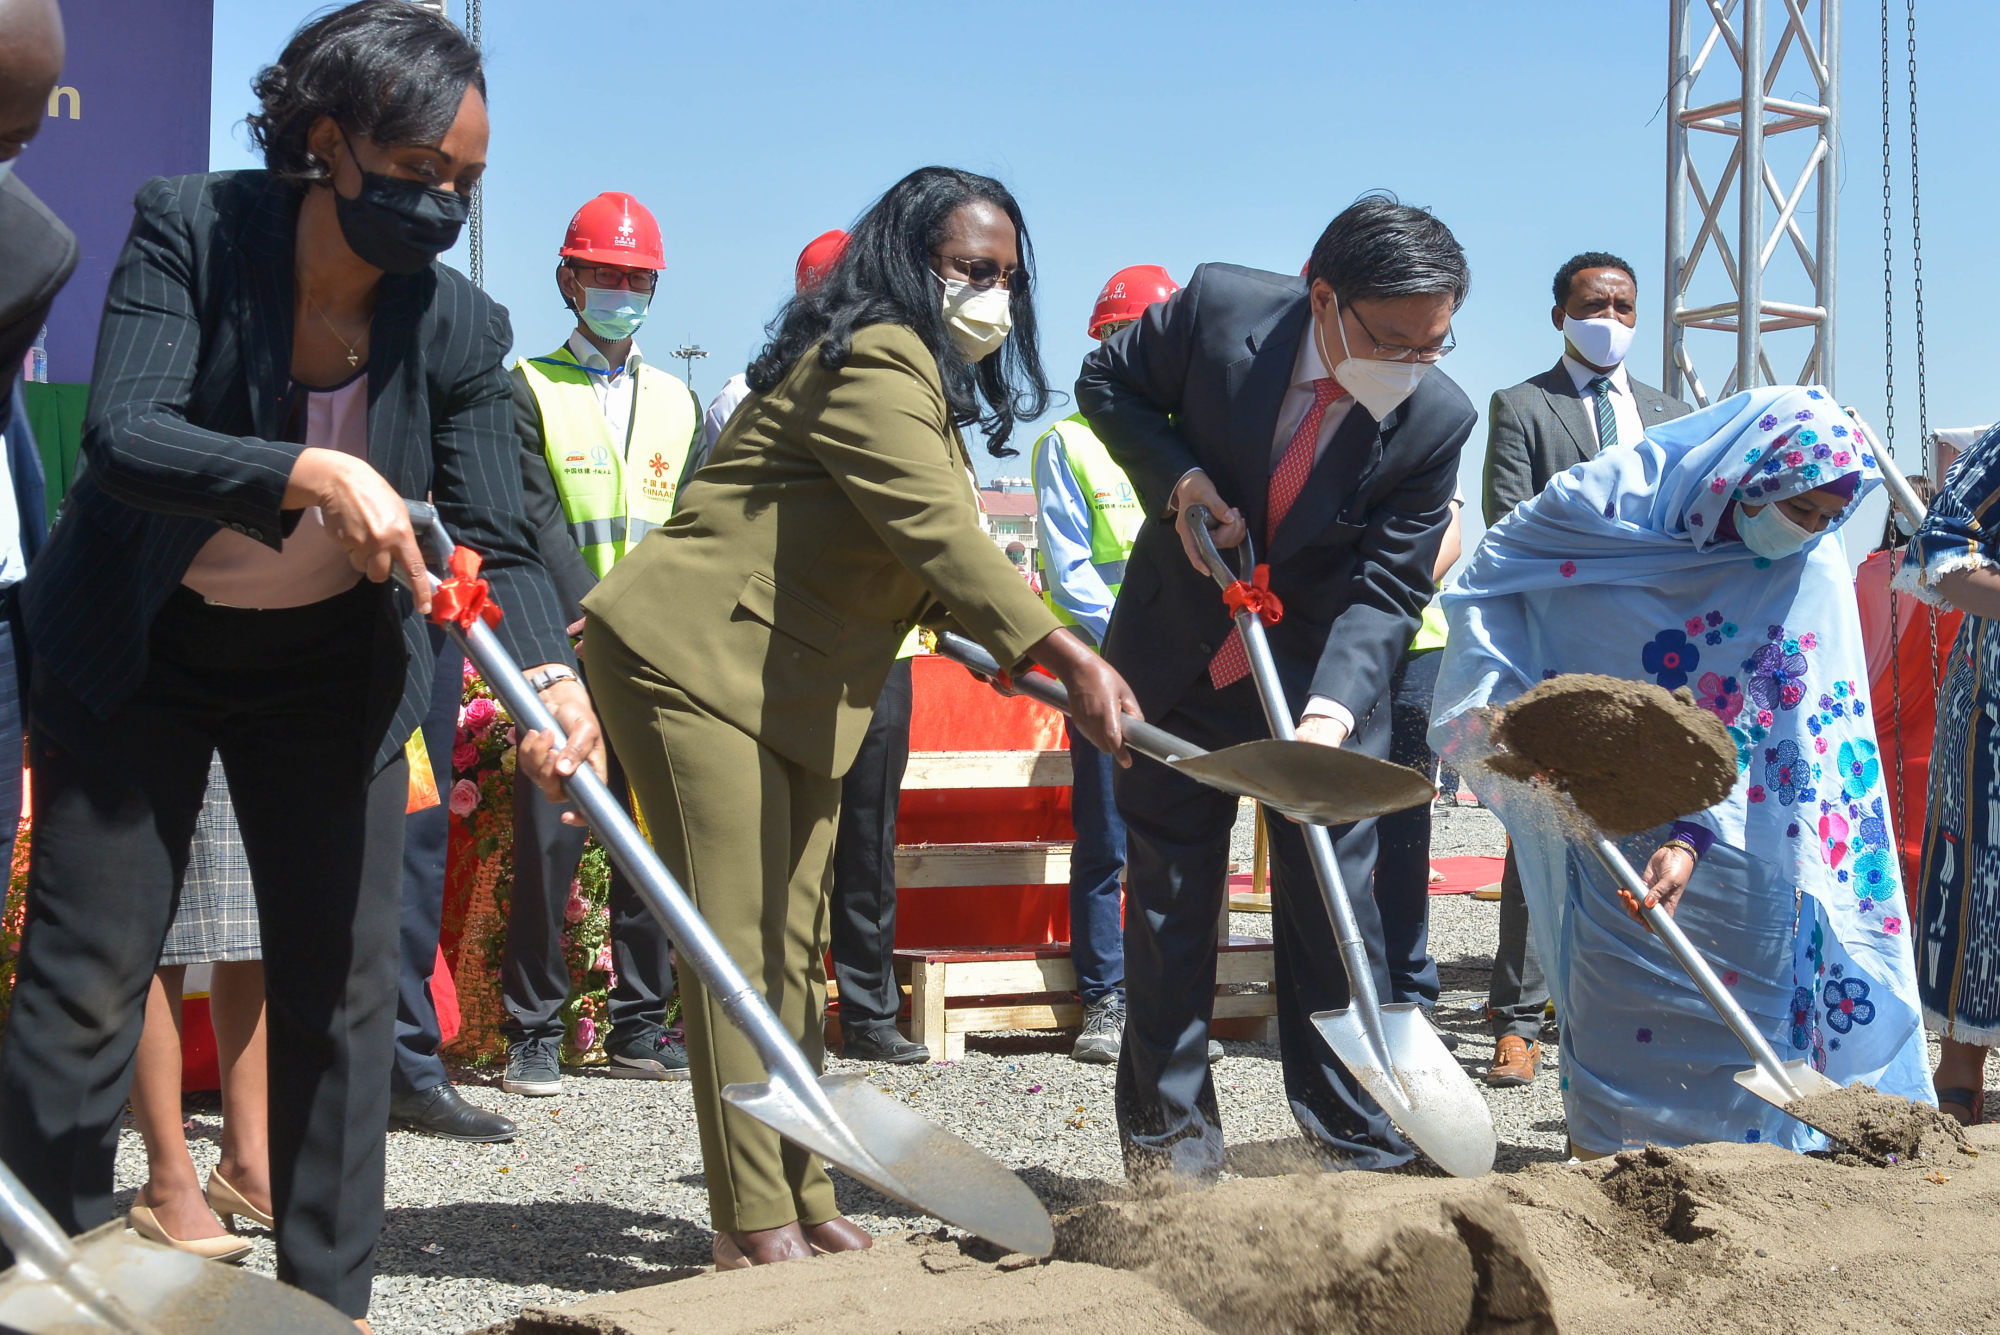 Ethiopian and Chinese officials at the groundbreaking ceremony for the Africa CDC headquarters in Addis Ababa in December 2020. Photo: Xinhua